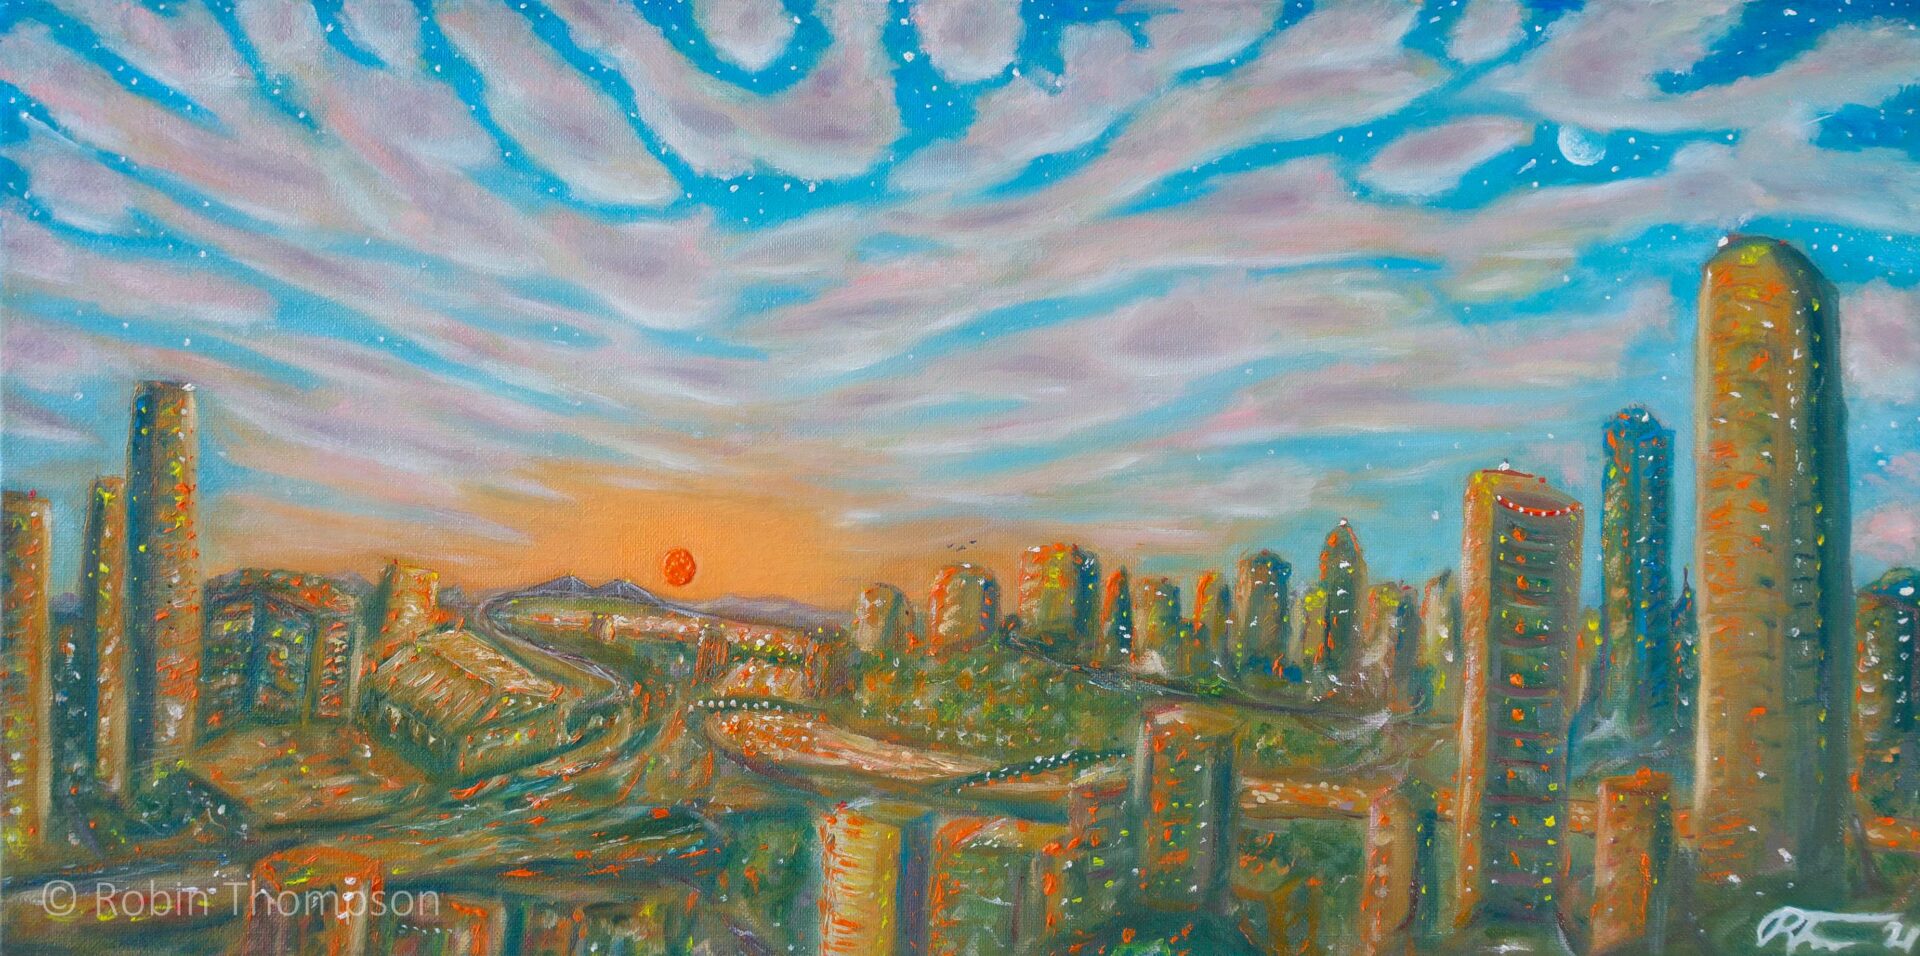 Oil painting of a stylised view of Melbourne/Naarm from Southbank, showing psychedlic-looking pink clouds, a bright sunset and golden city buildings.